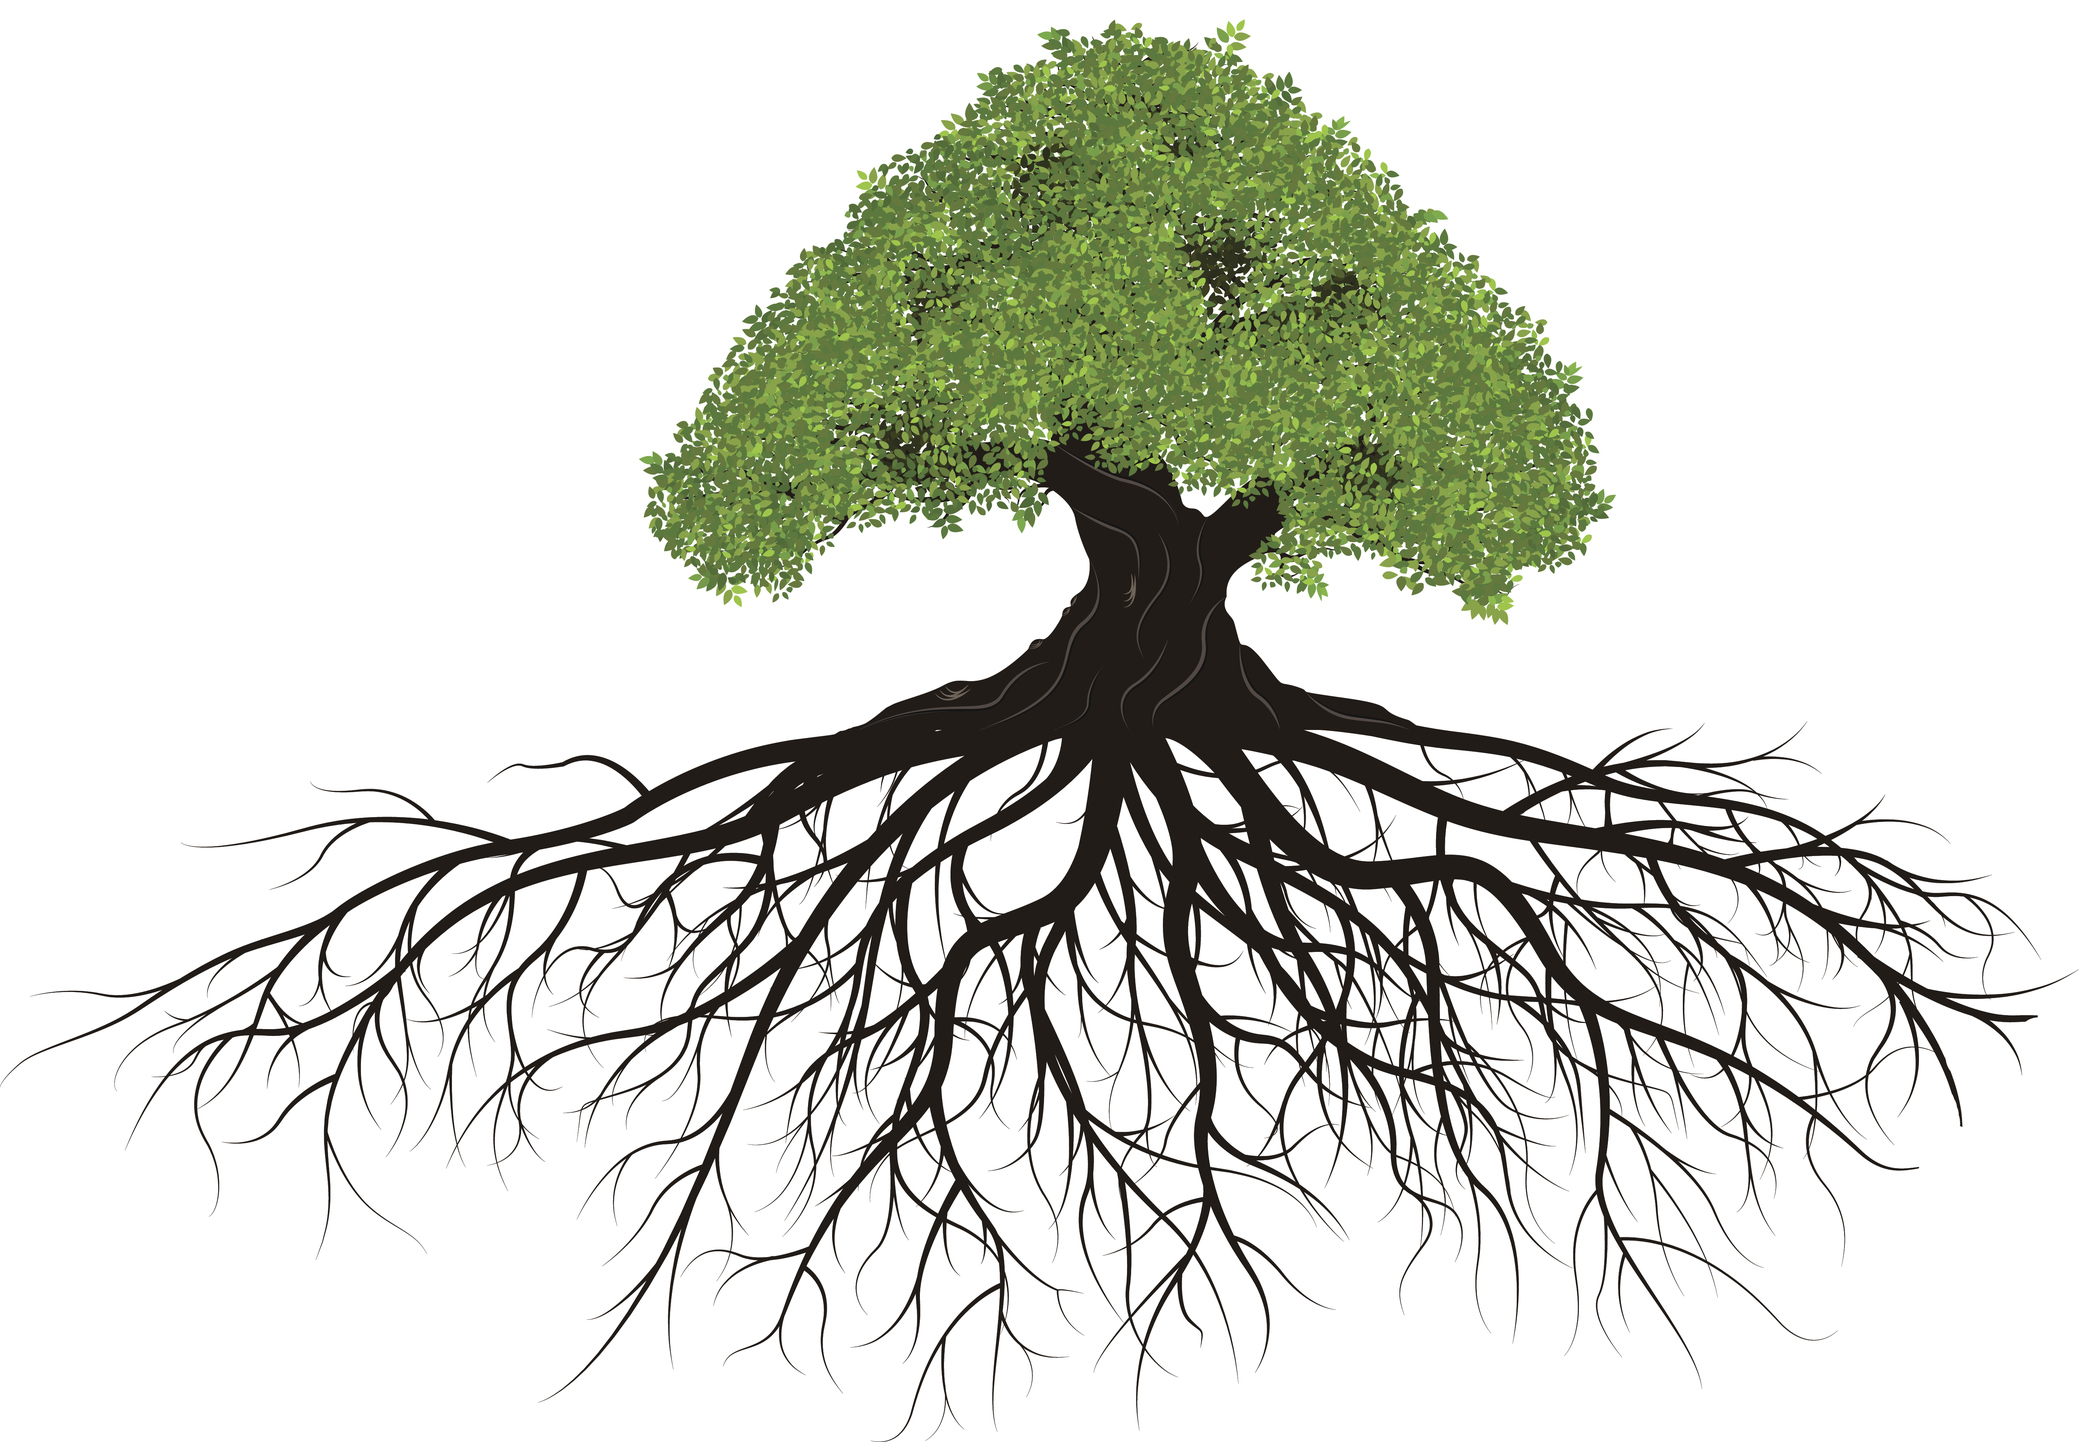 Cartoon Tree Drawing With Roots : Tree with roots on white background